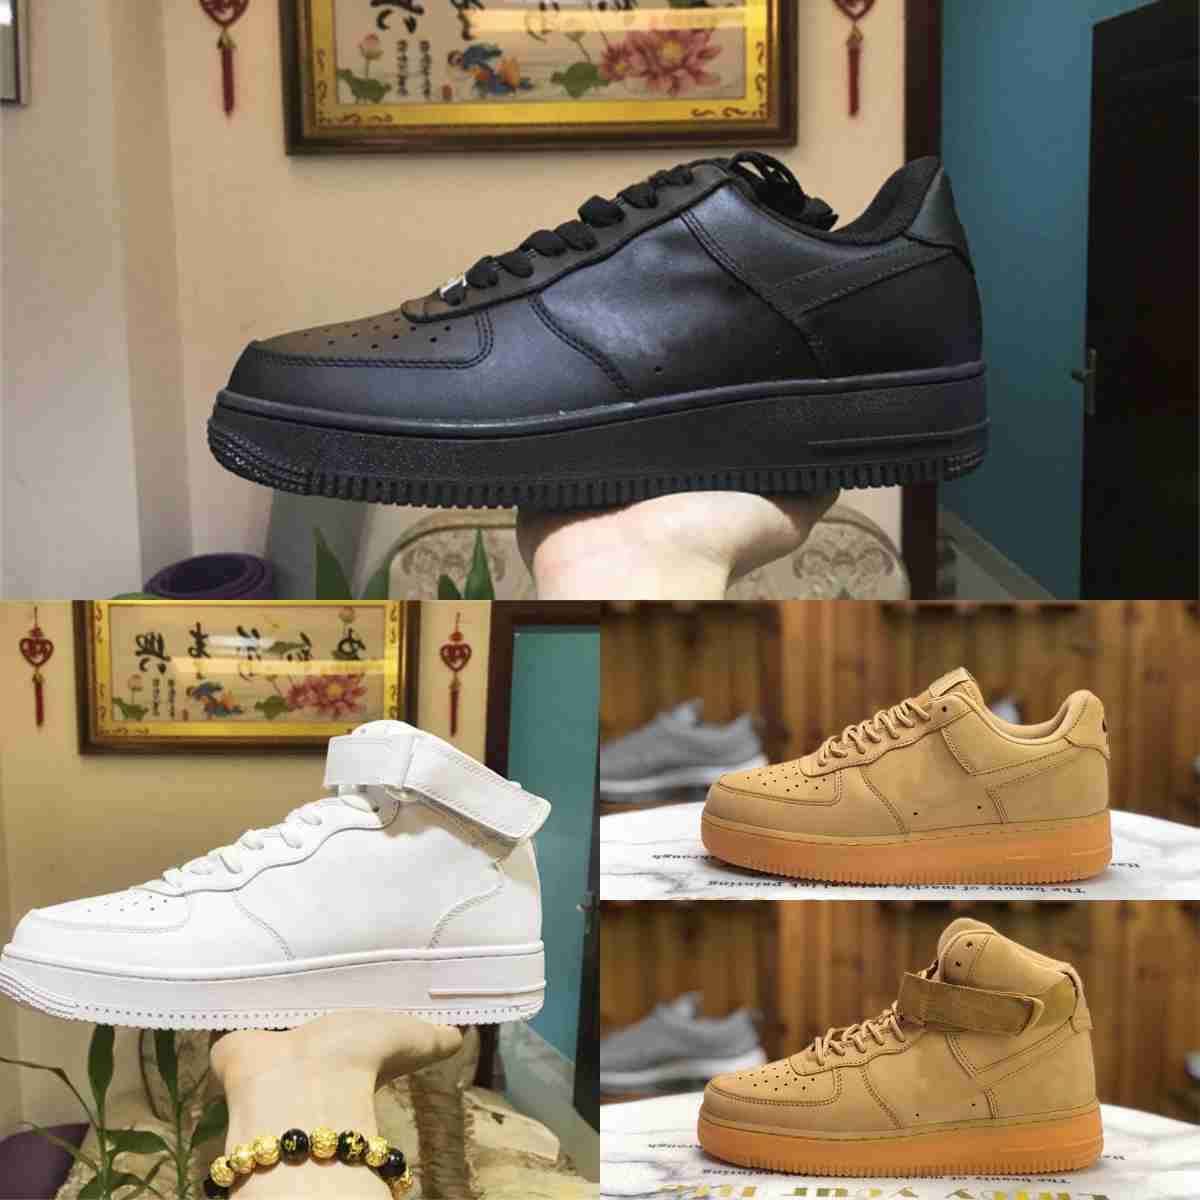 

AirforCes 1 Classic Running Shoes One Skateboarding Retro Trainers ForCes 1s 07 Original Sports Sneakers Triple White Black Airs High Low Cut Size 36-46 Skate Shoe A26, Please contact us